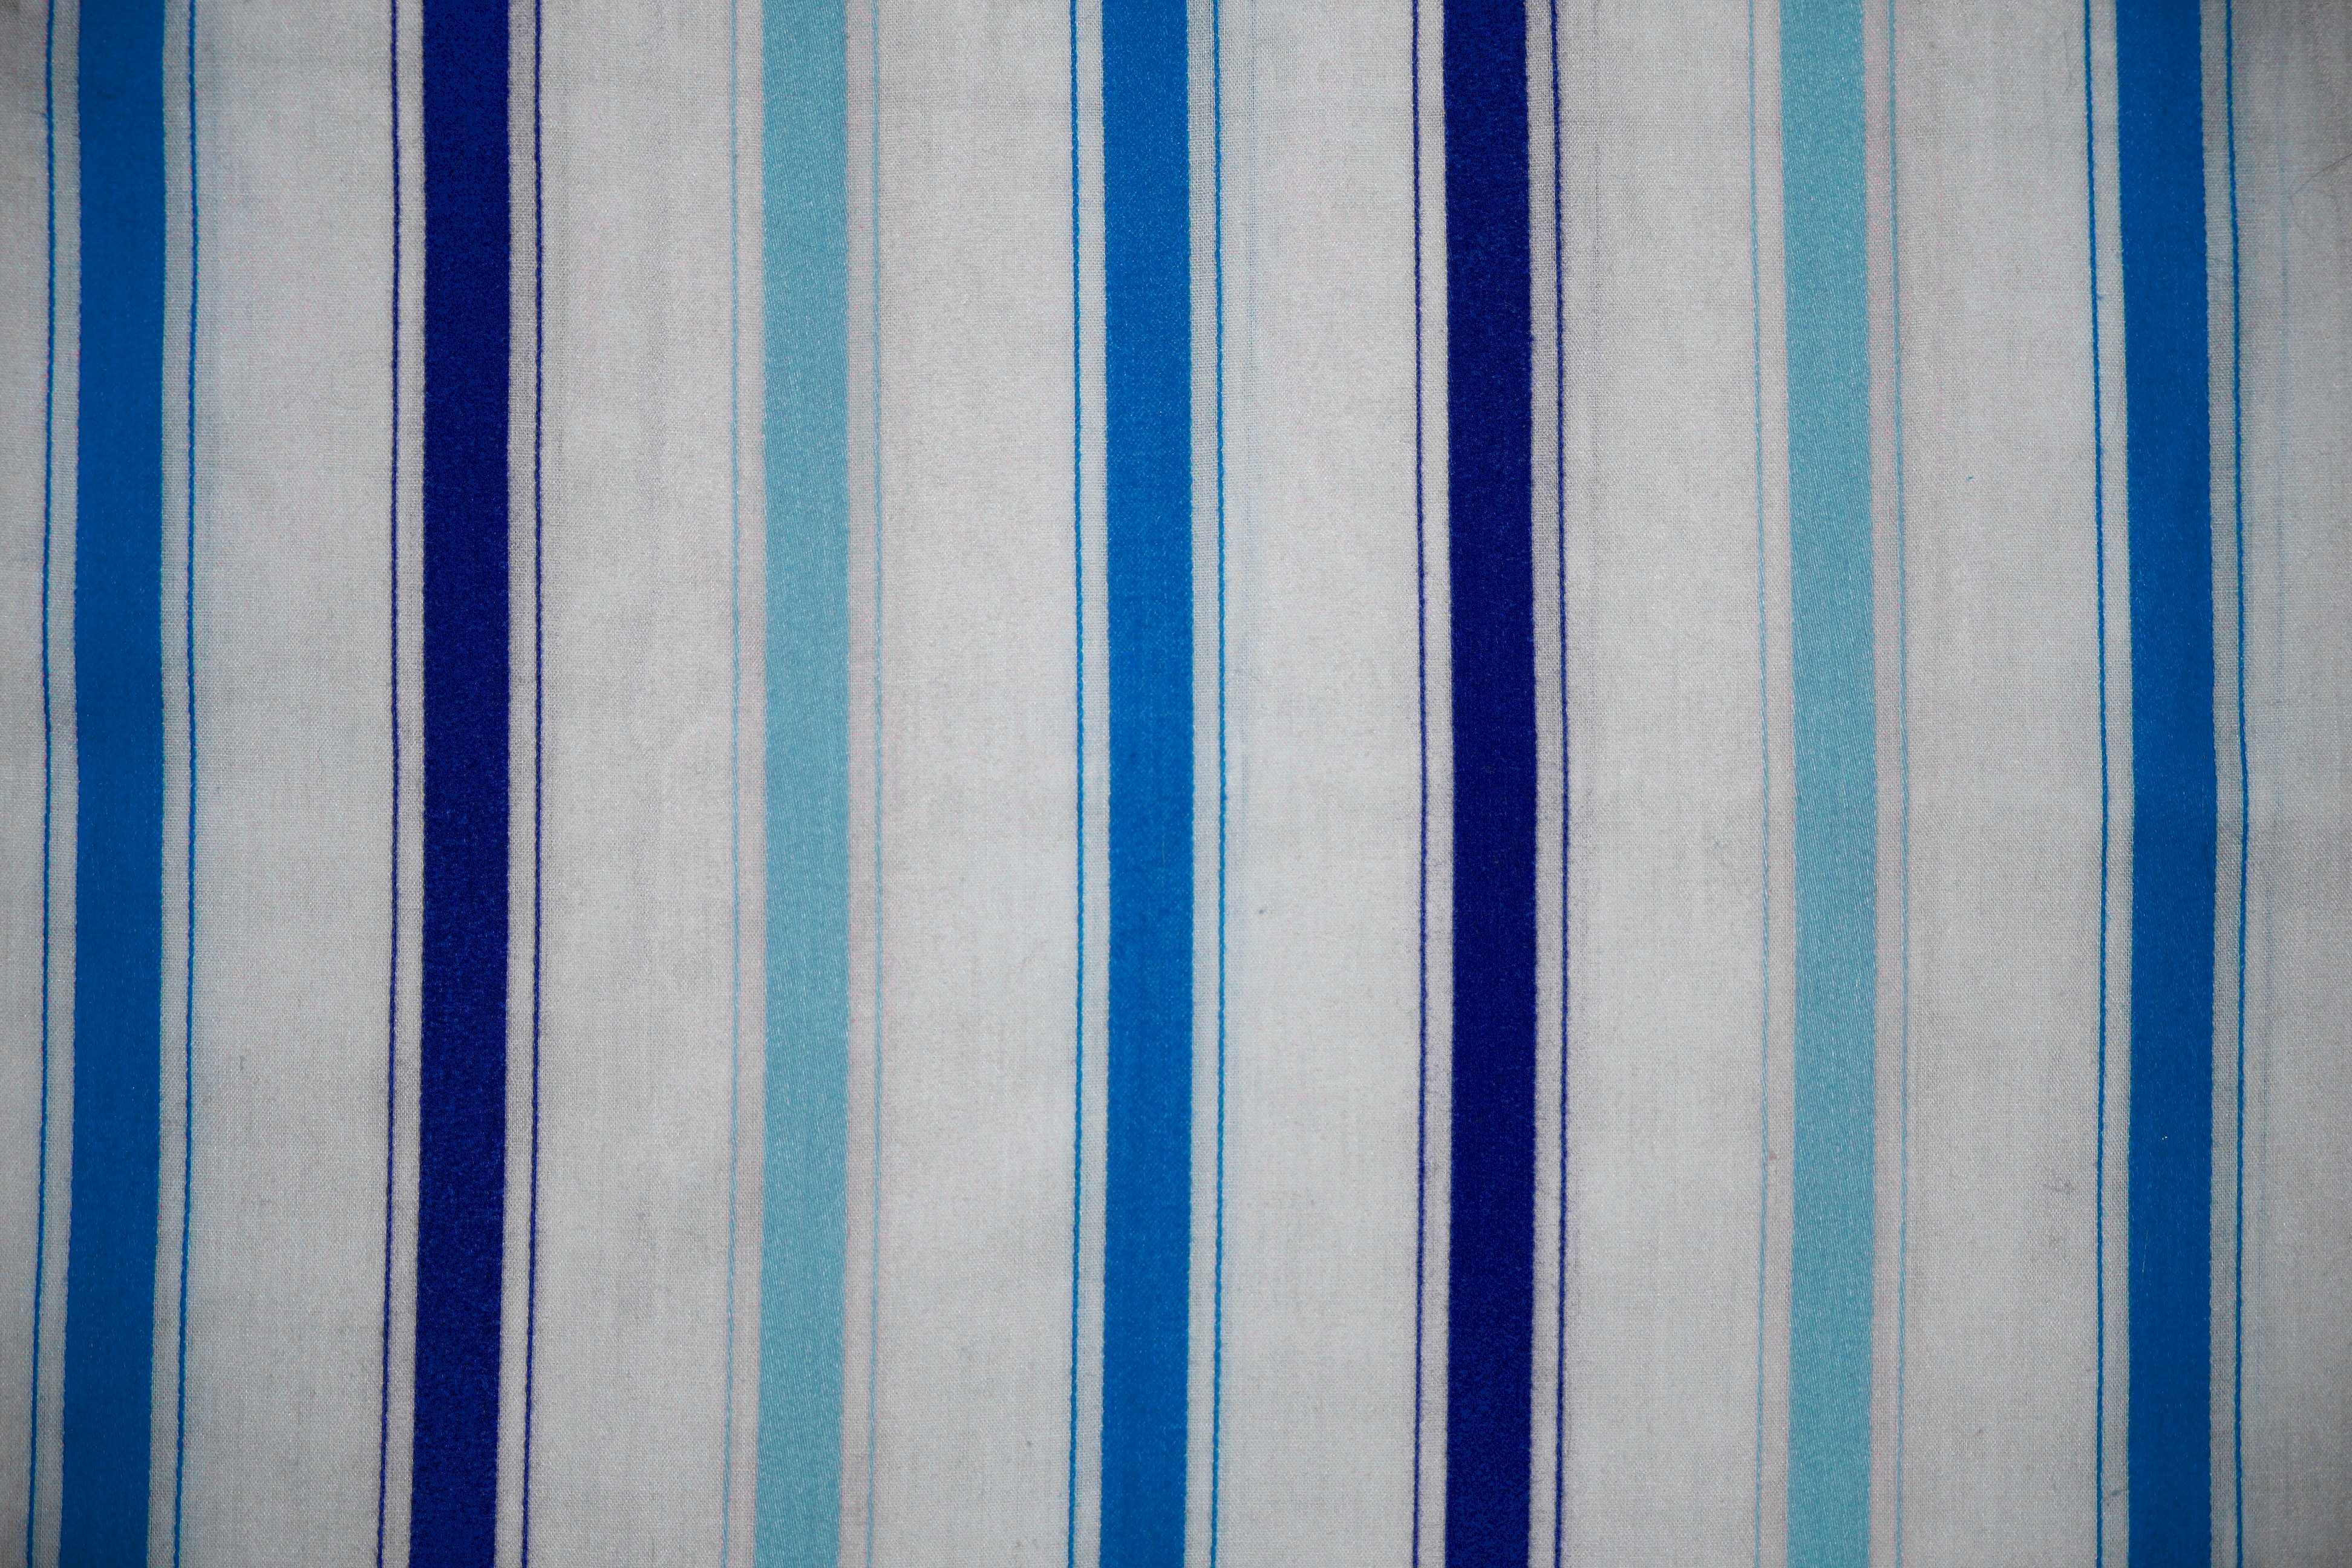 Striped Fabric Texture Blue on White Picture | Free Photograph ...